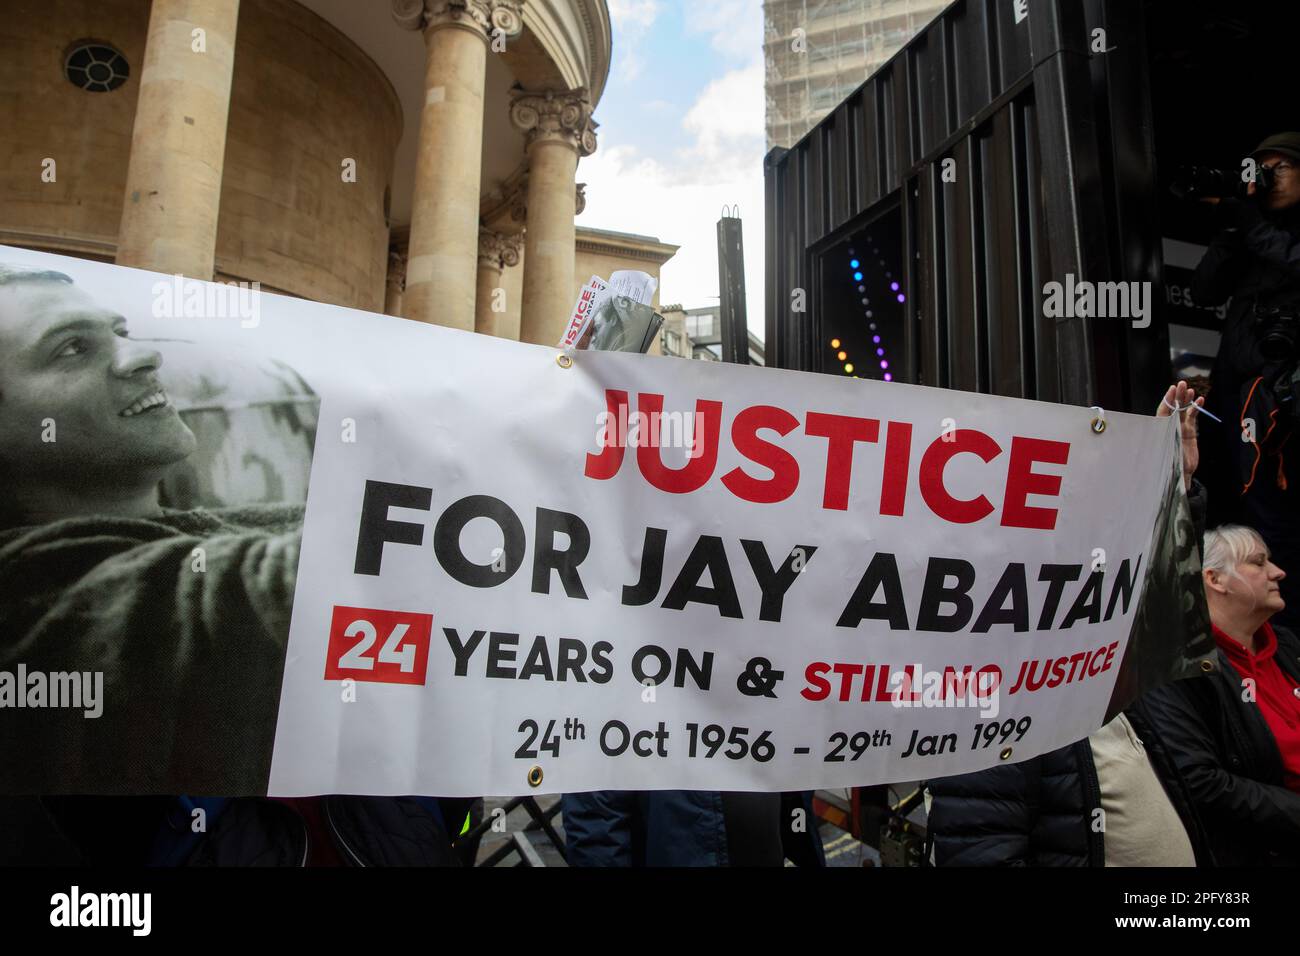 Campaigners from the Justice for Jay Abatan campaign take part in a Resist Racism demonstration organised by Stand Up To Racism and the Trades Union Congress (TUC) as part of a global day of action against racism on 18 March 2023 in London, United Kingdom. Speakers expressed their anger at and opposition to the government’s controversial Illegal Migration Bill. (photo by Mark Kerrison/In Pictures via Getty Images) Stock Photo